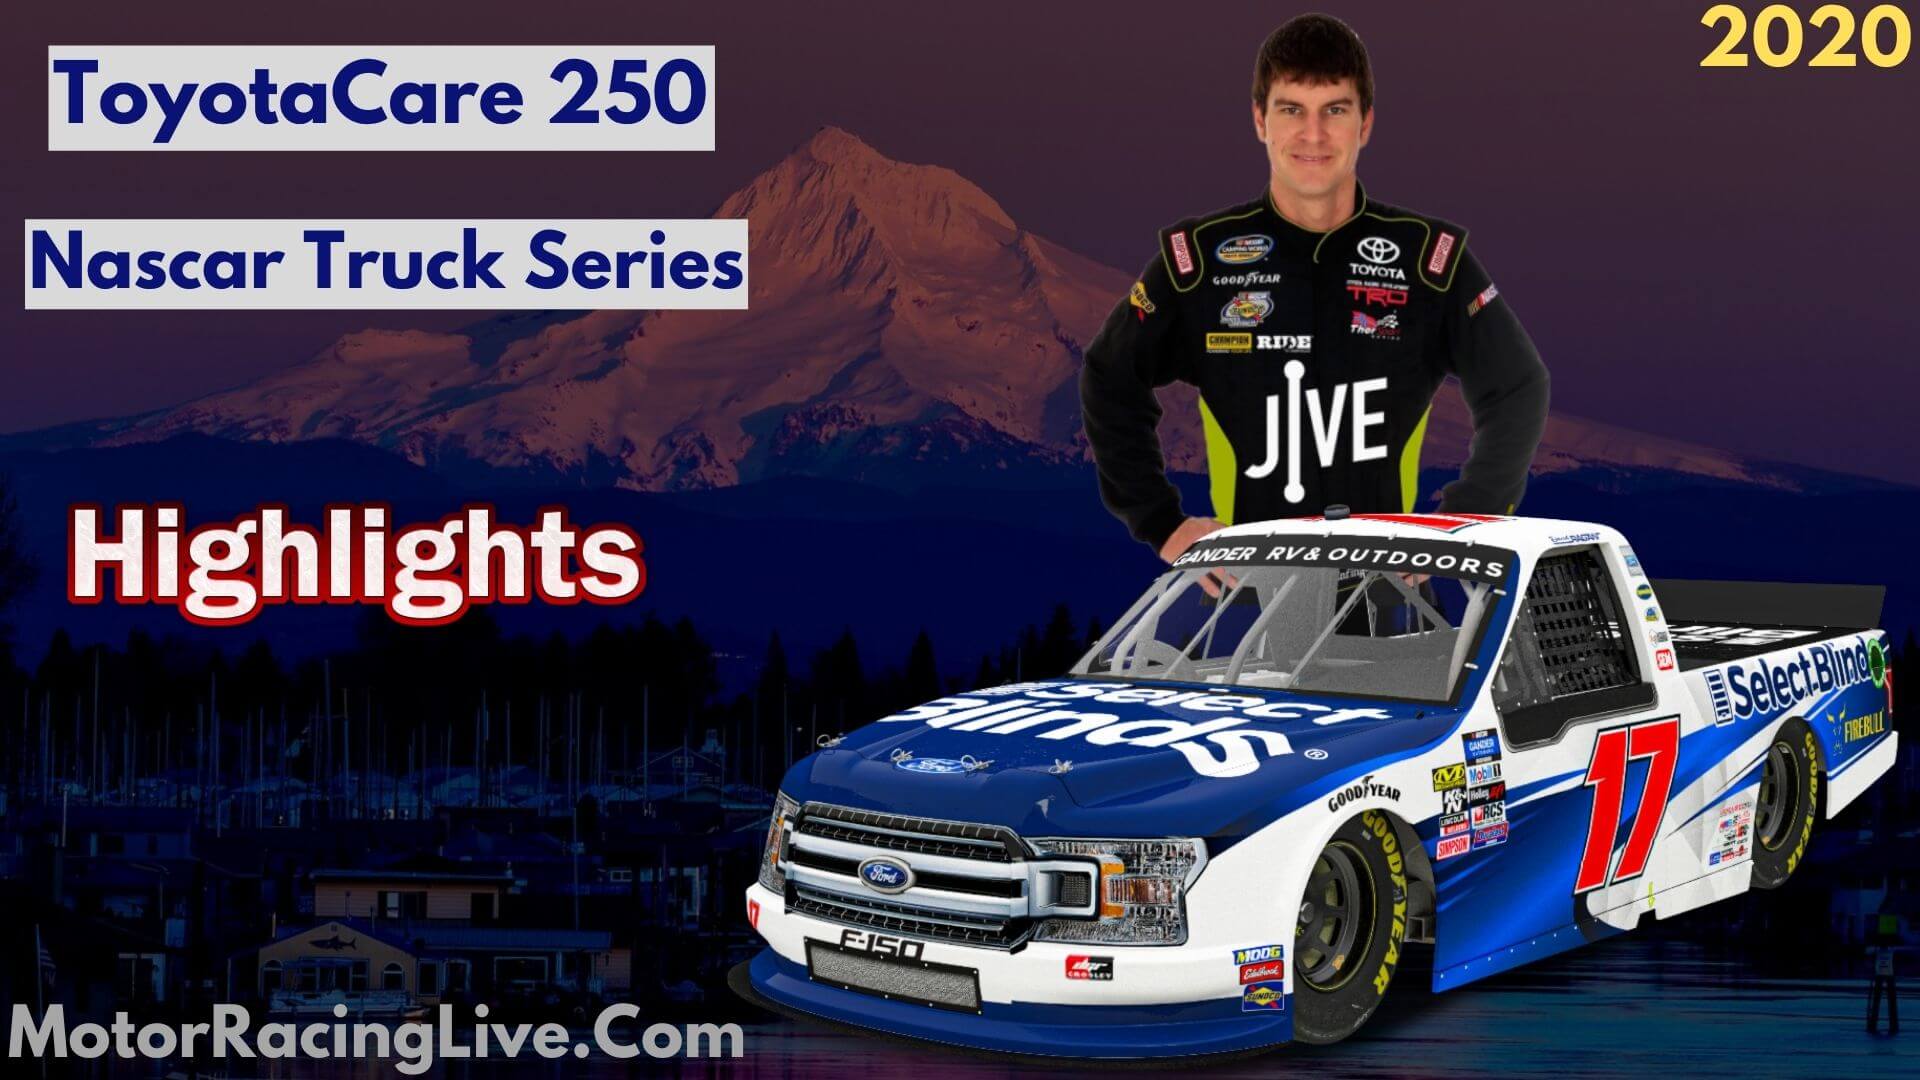 ToyotaCare 250 Highlights Nascar Truck Series 2020